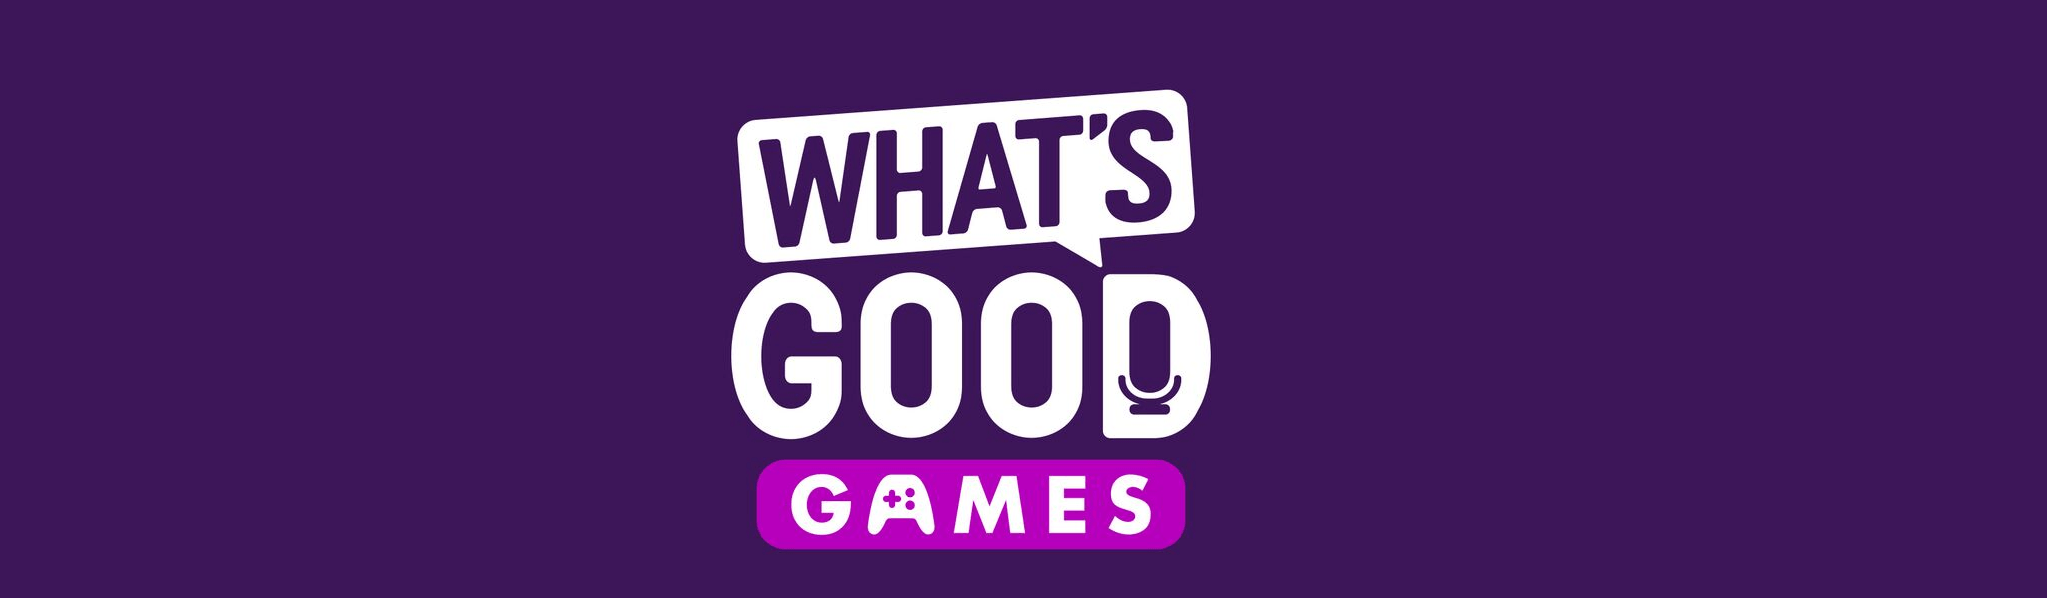 Coolest Gaming Logo - Video Game Podcast | Gaming Podcast | What's Good Games